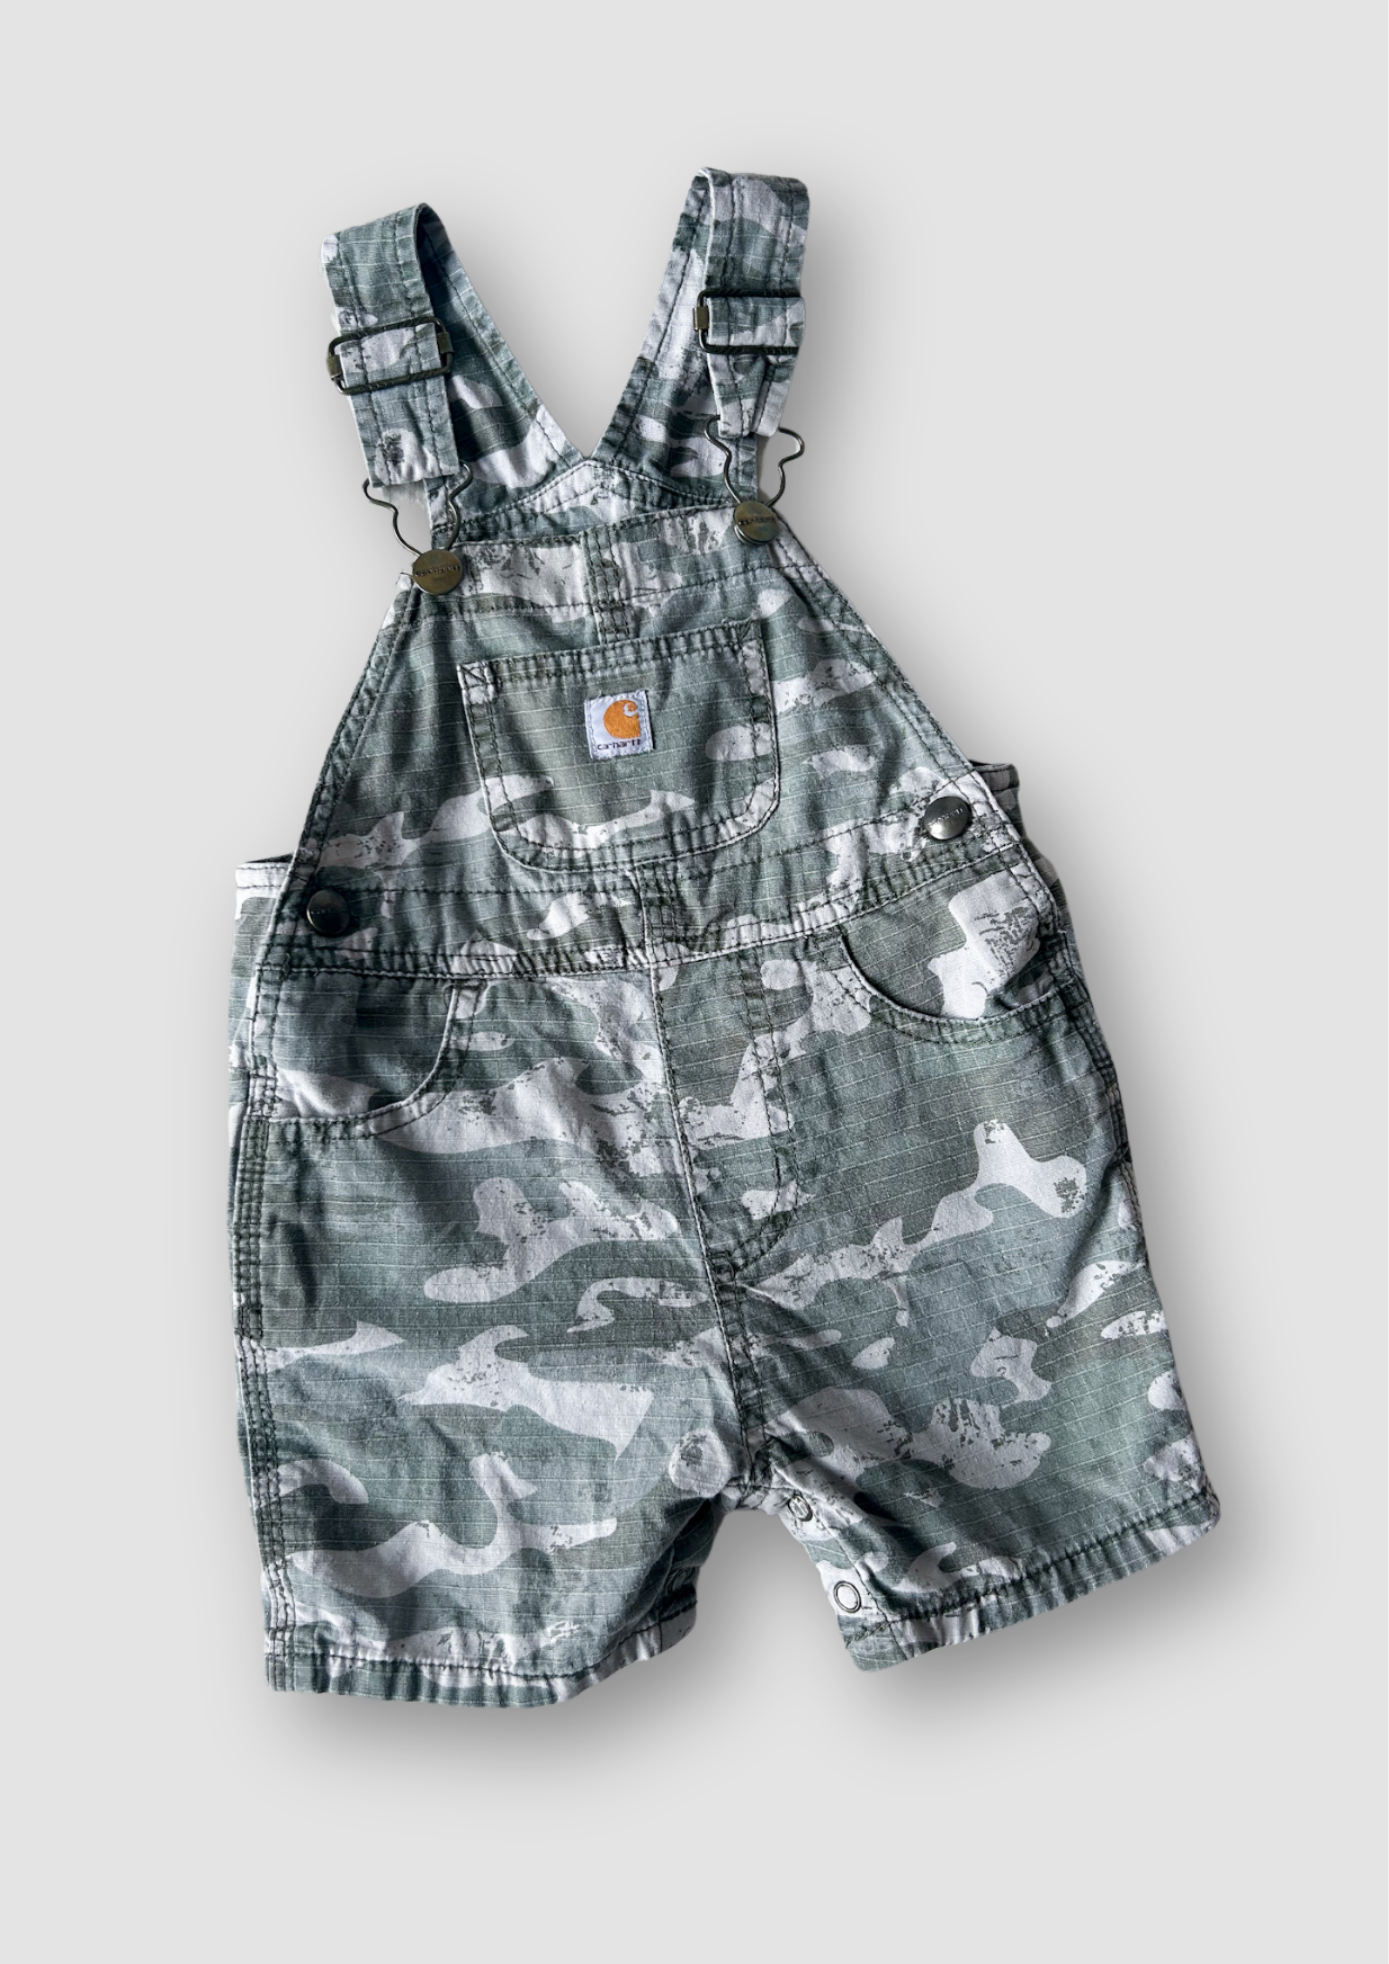 Preloved 2012 Carhartt Camo Short Dungarees, approx 1-2 years